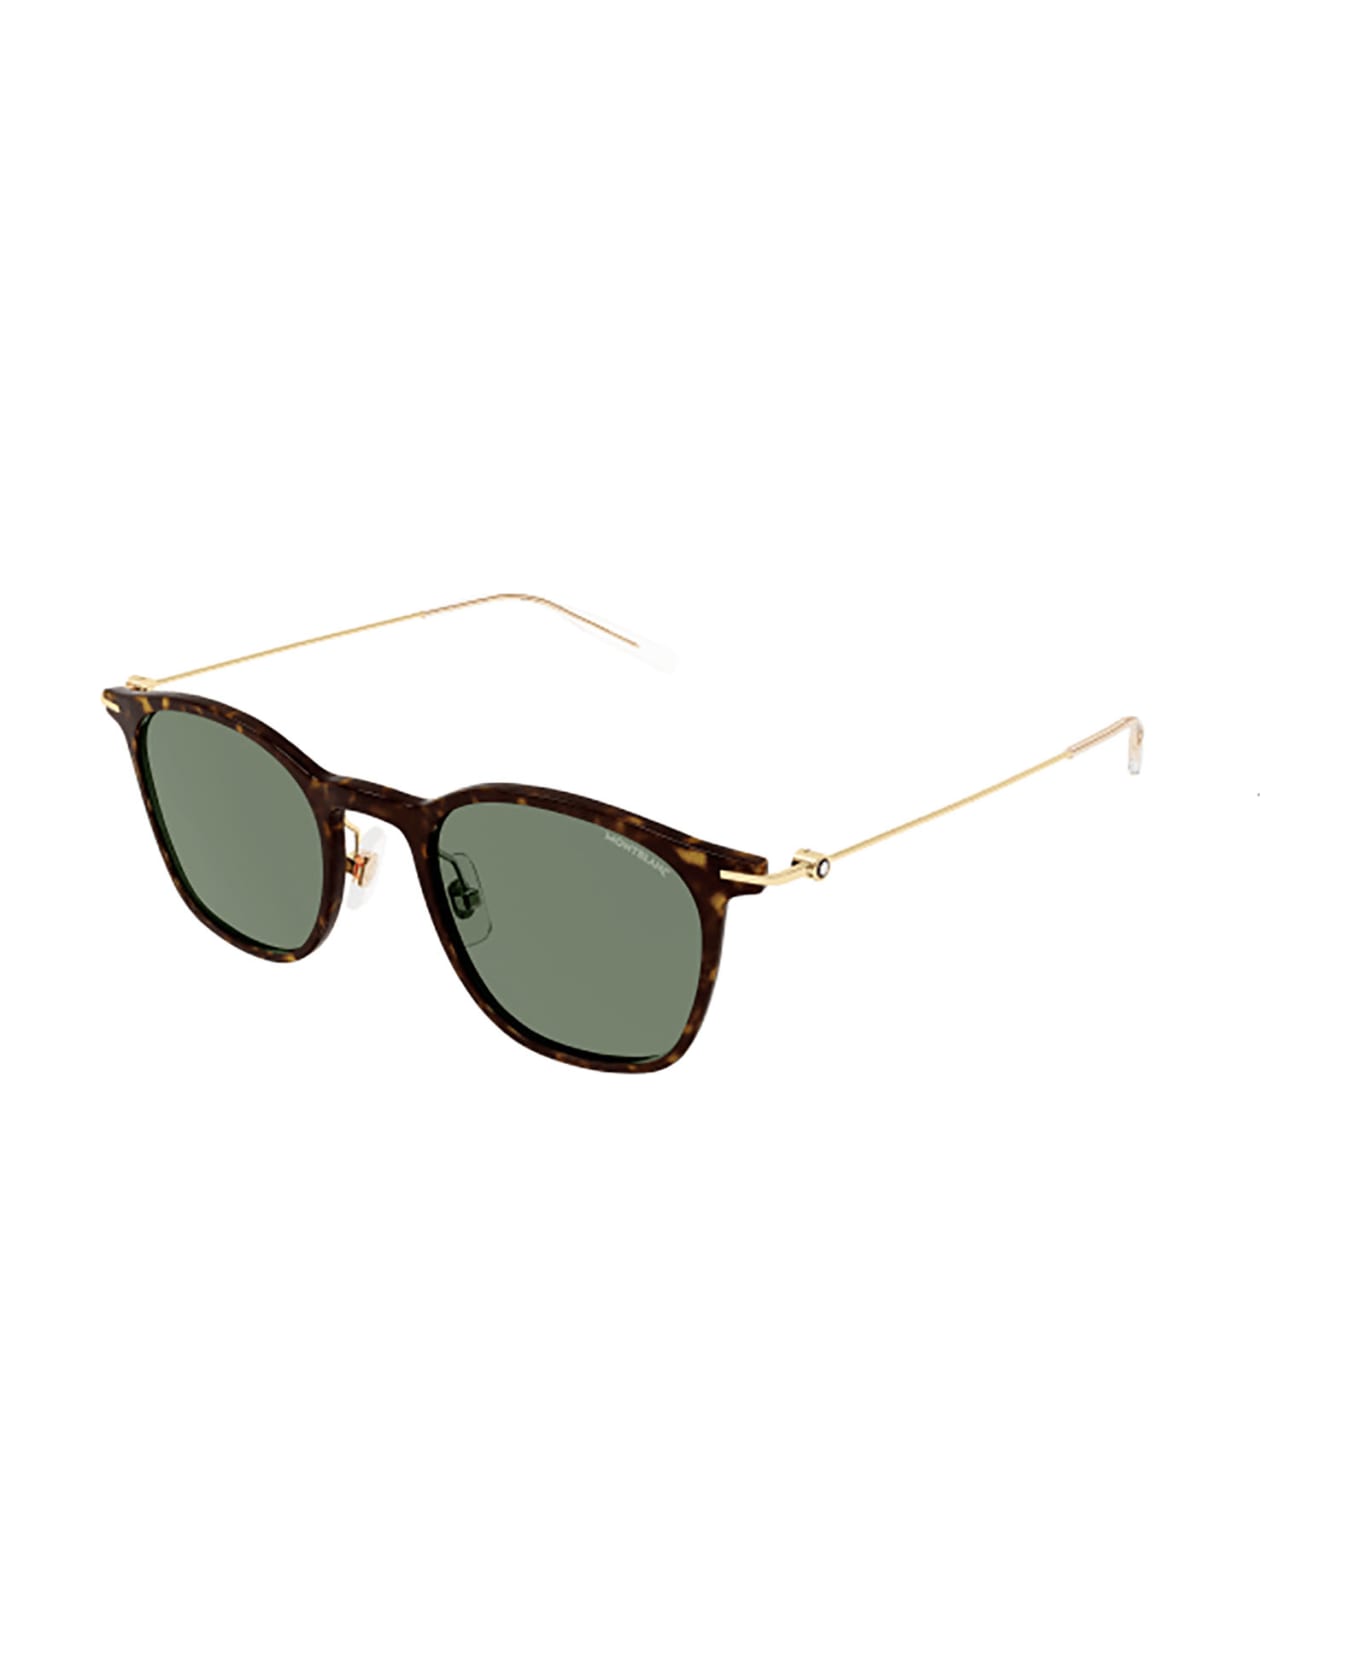 Montblanc MB0098S Sunglasses - Hale completed her look with metallic-framed sunglasses and a simple necklace